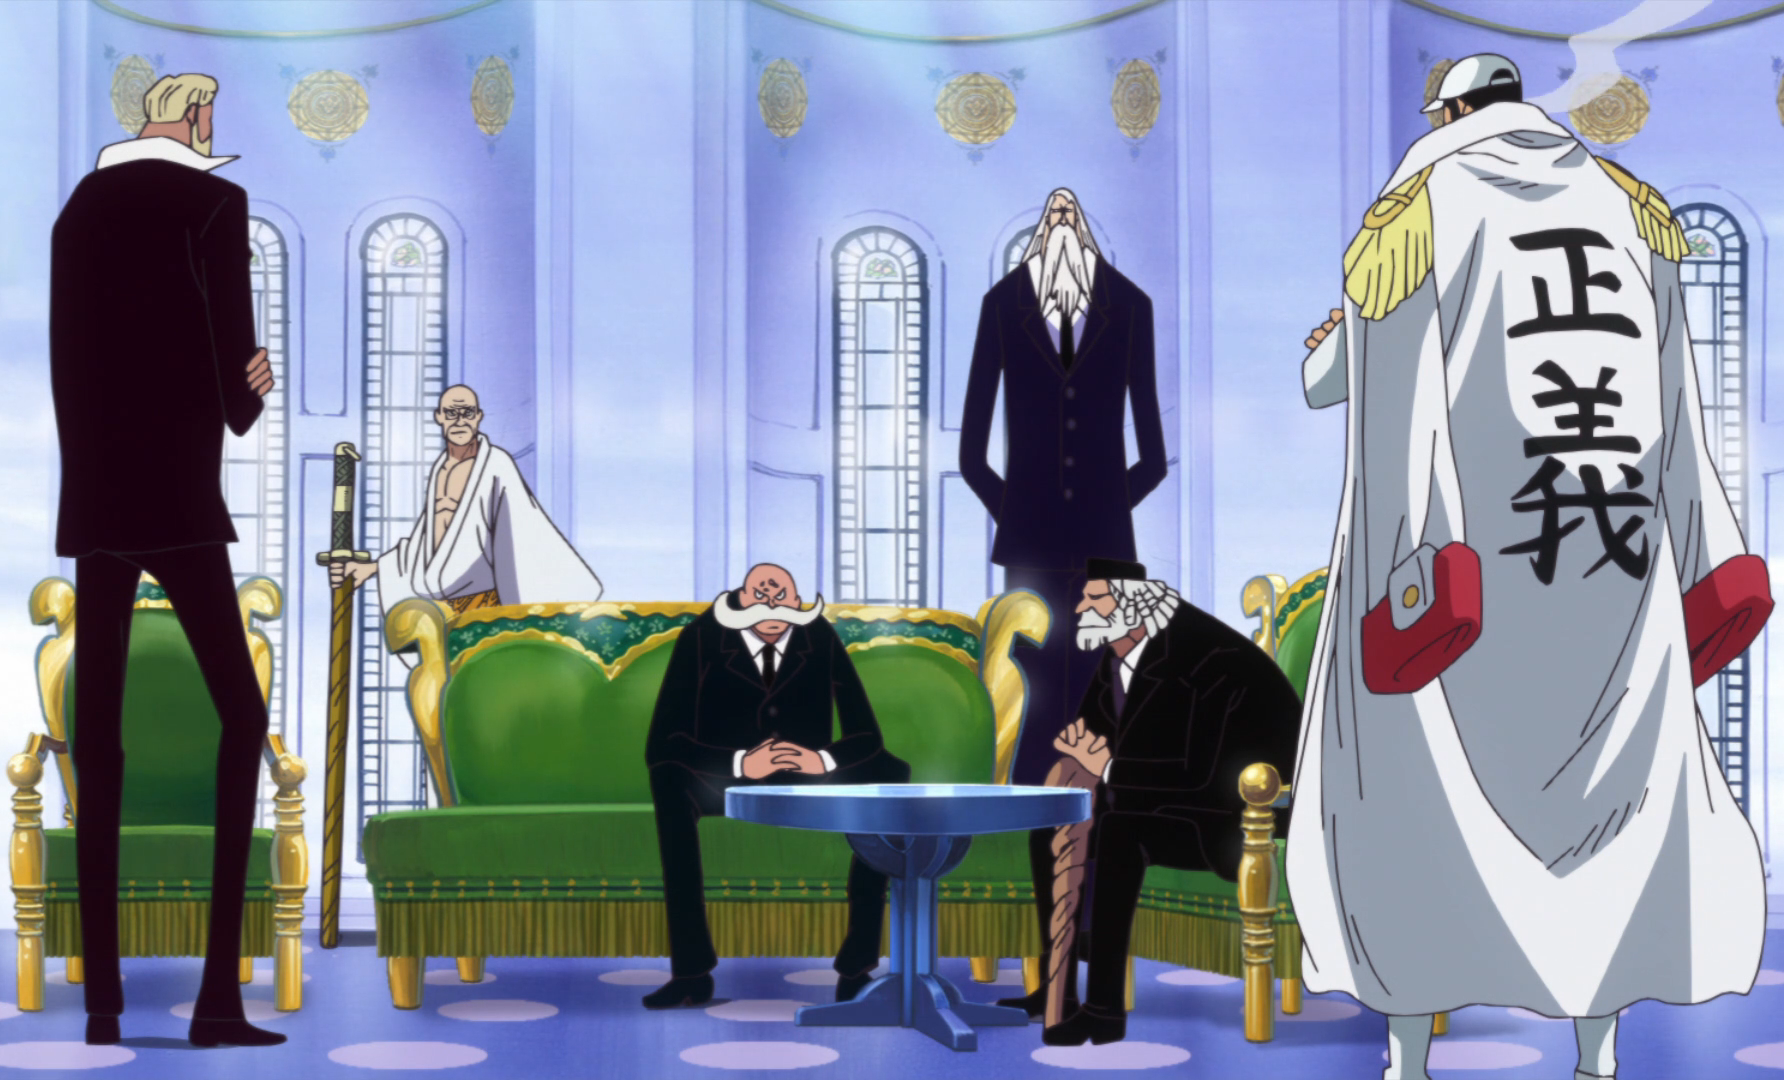 https://static.wikia.nocookie.net/onepiece/images/d/d1/Sakazuki_and_Five_Elders_Meeting.png/revision/latest?cb=20160411034019